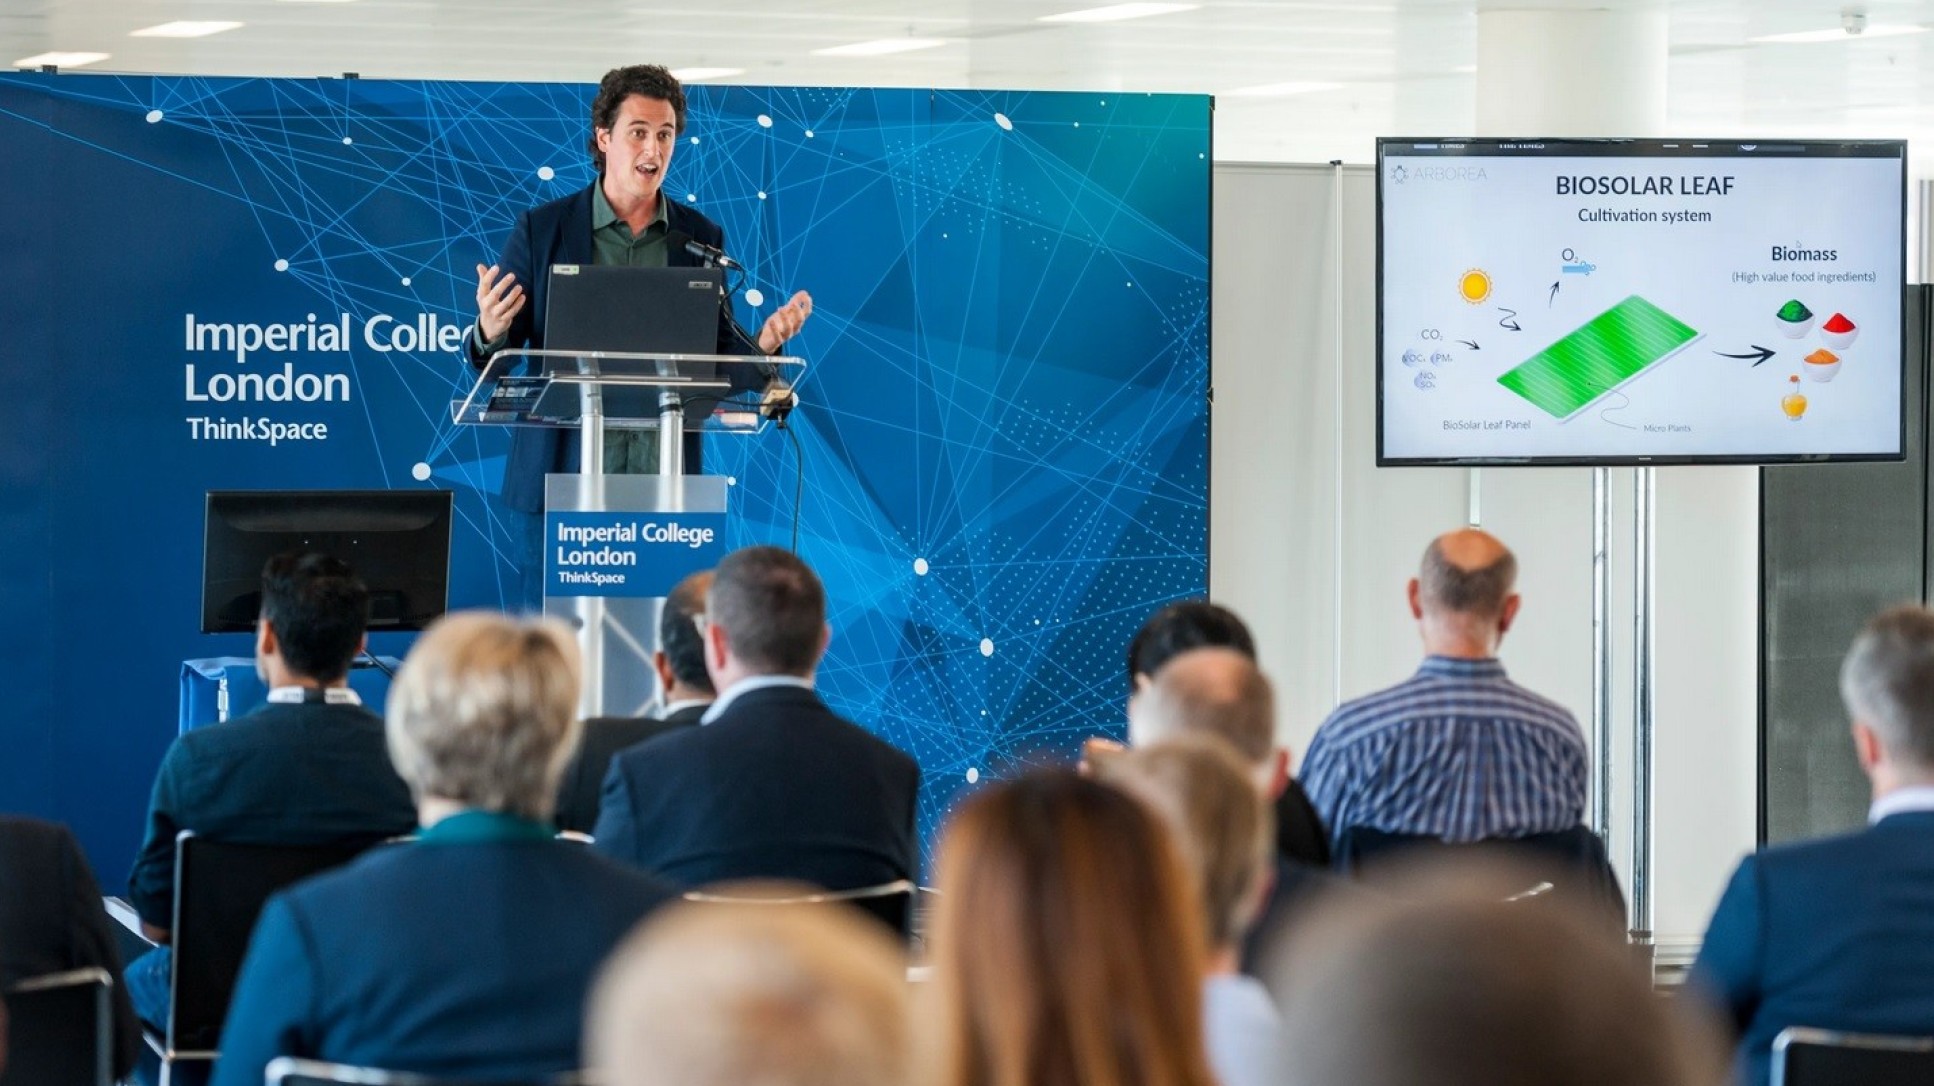 Julian Melchiorri speaking about Arborea's technology at an event in the I-HUB (2018)